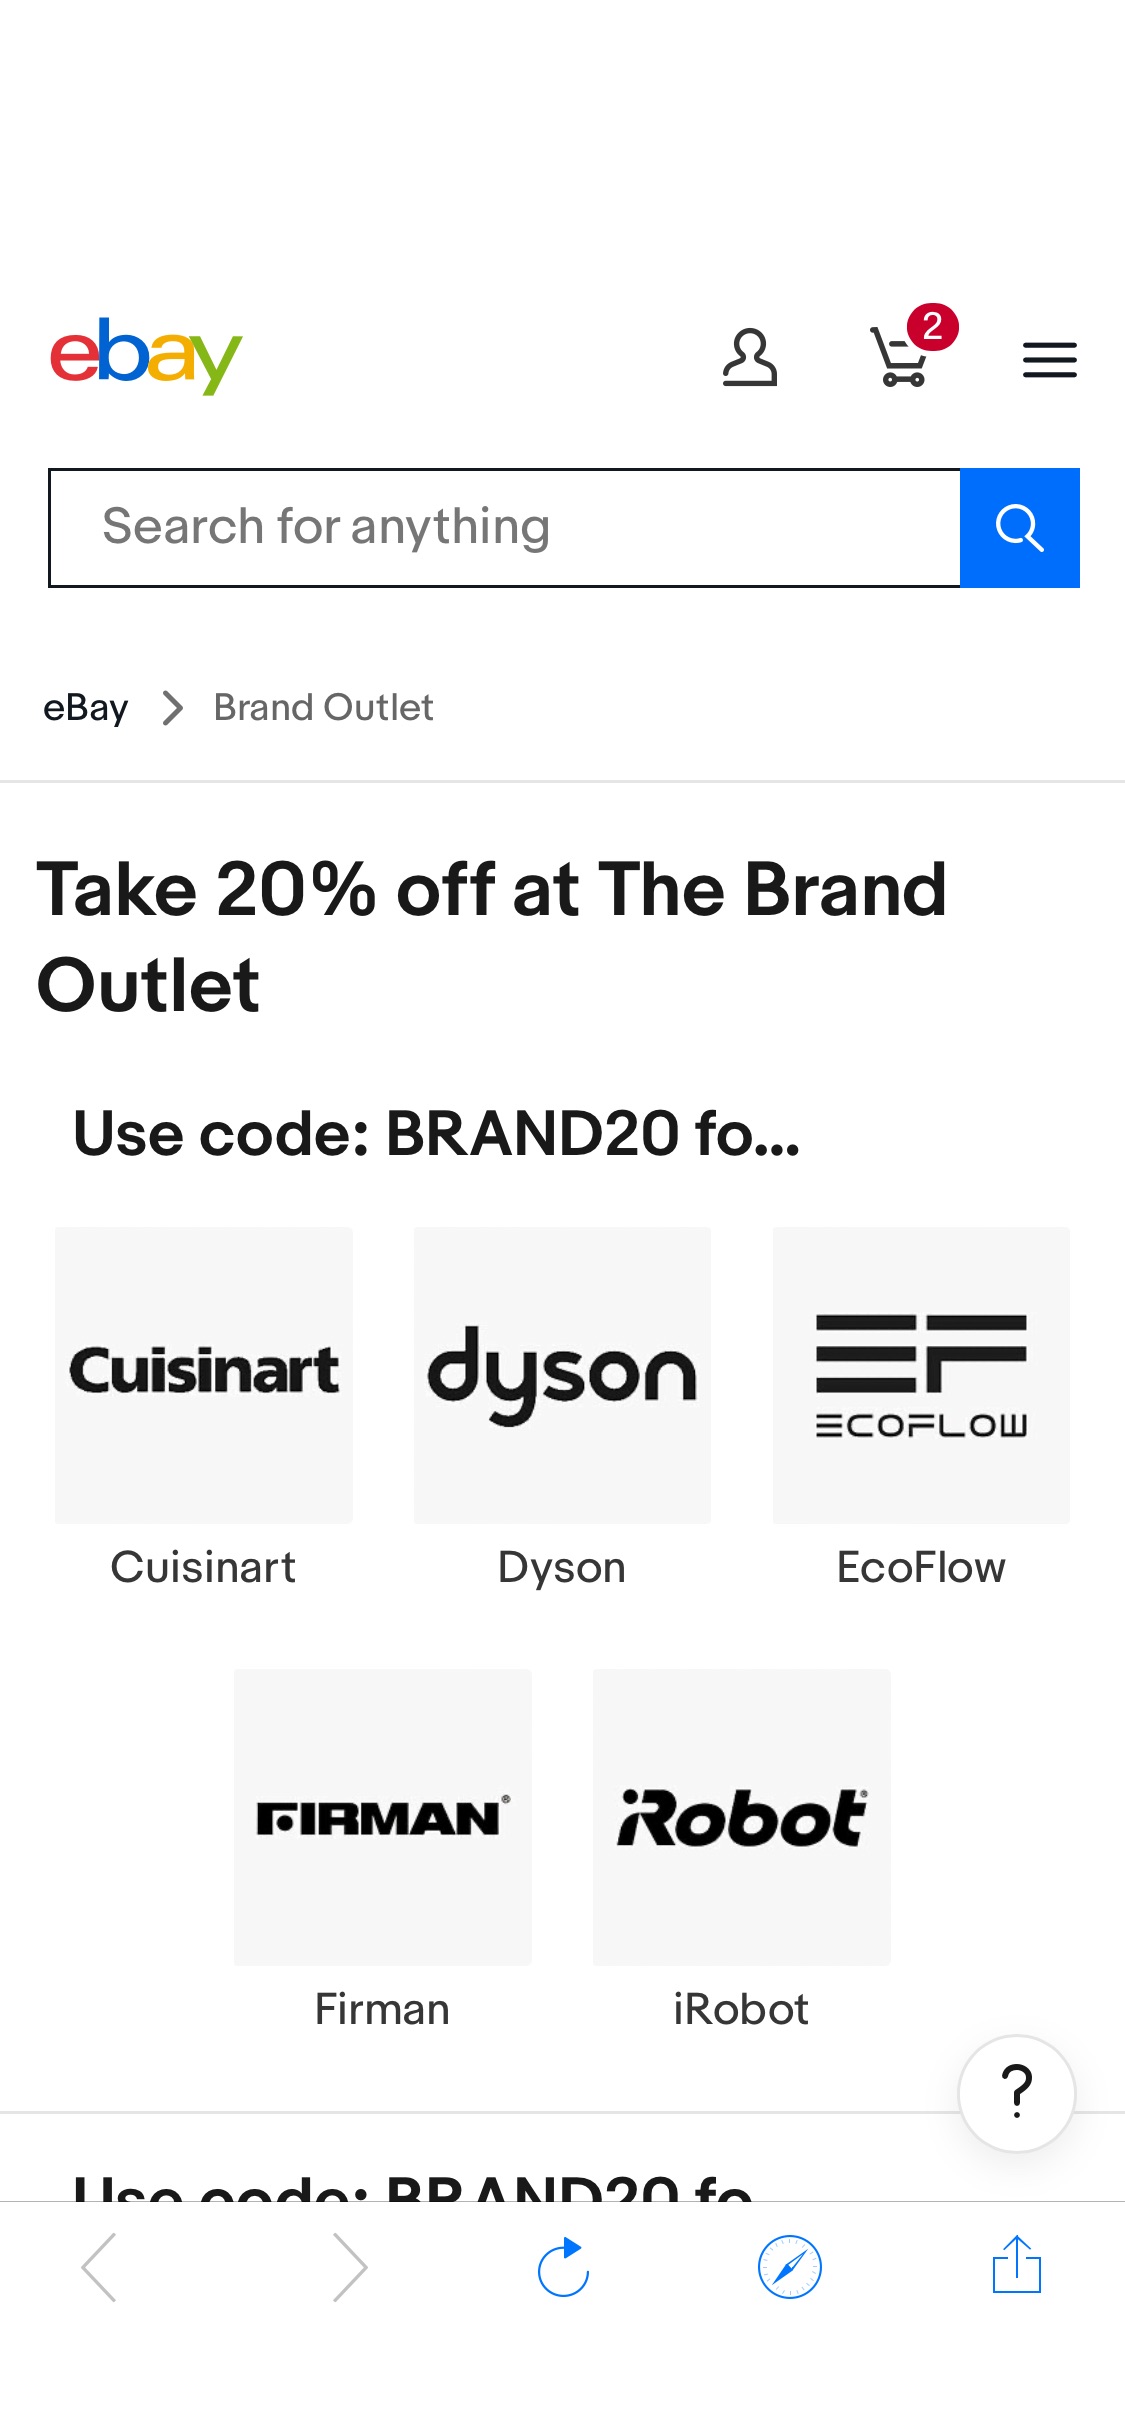 eBay has 20% Off Sale with code "BRAND20". Shipping is free.